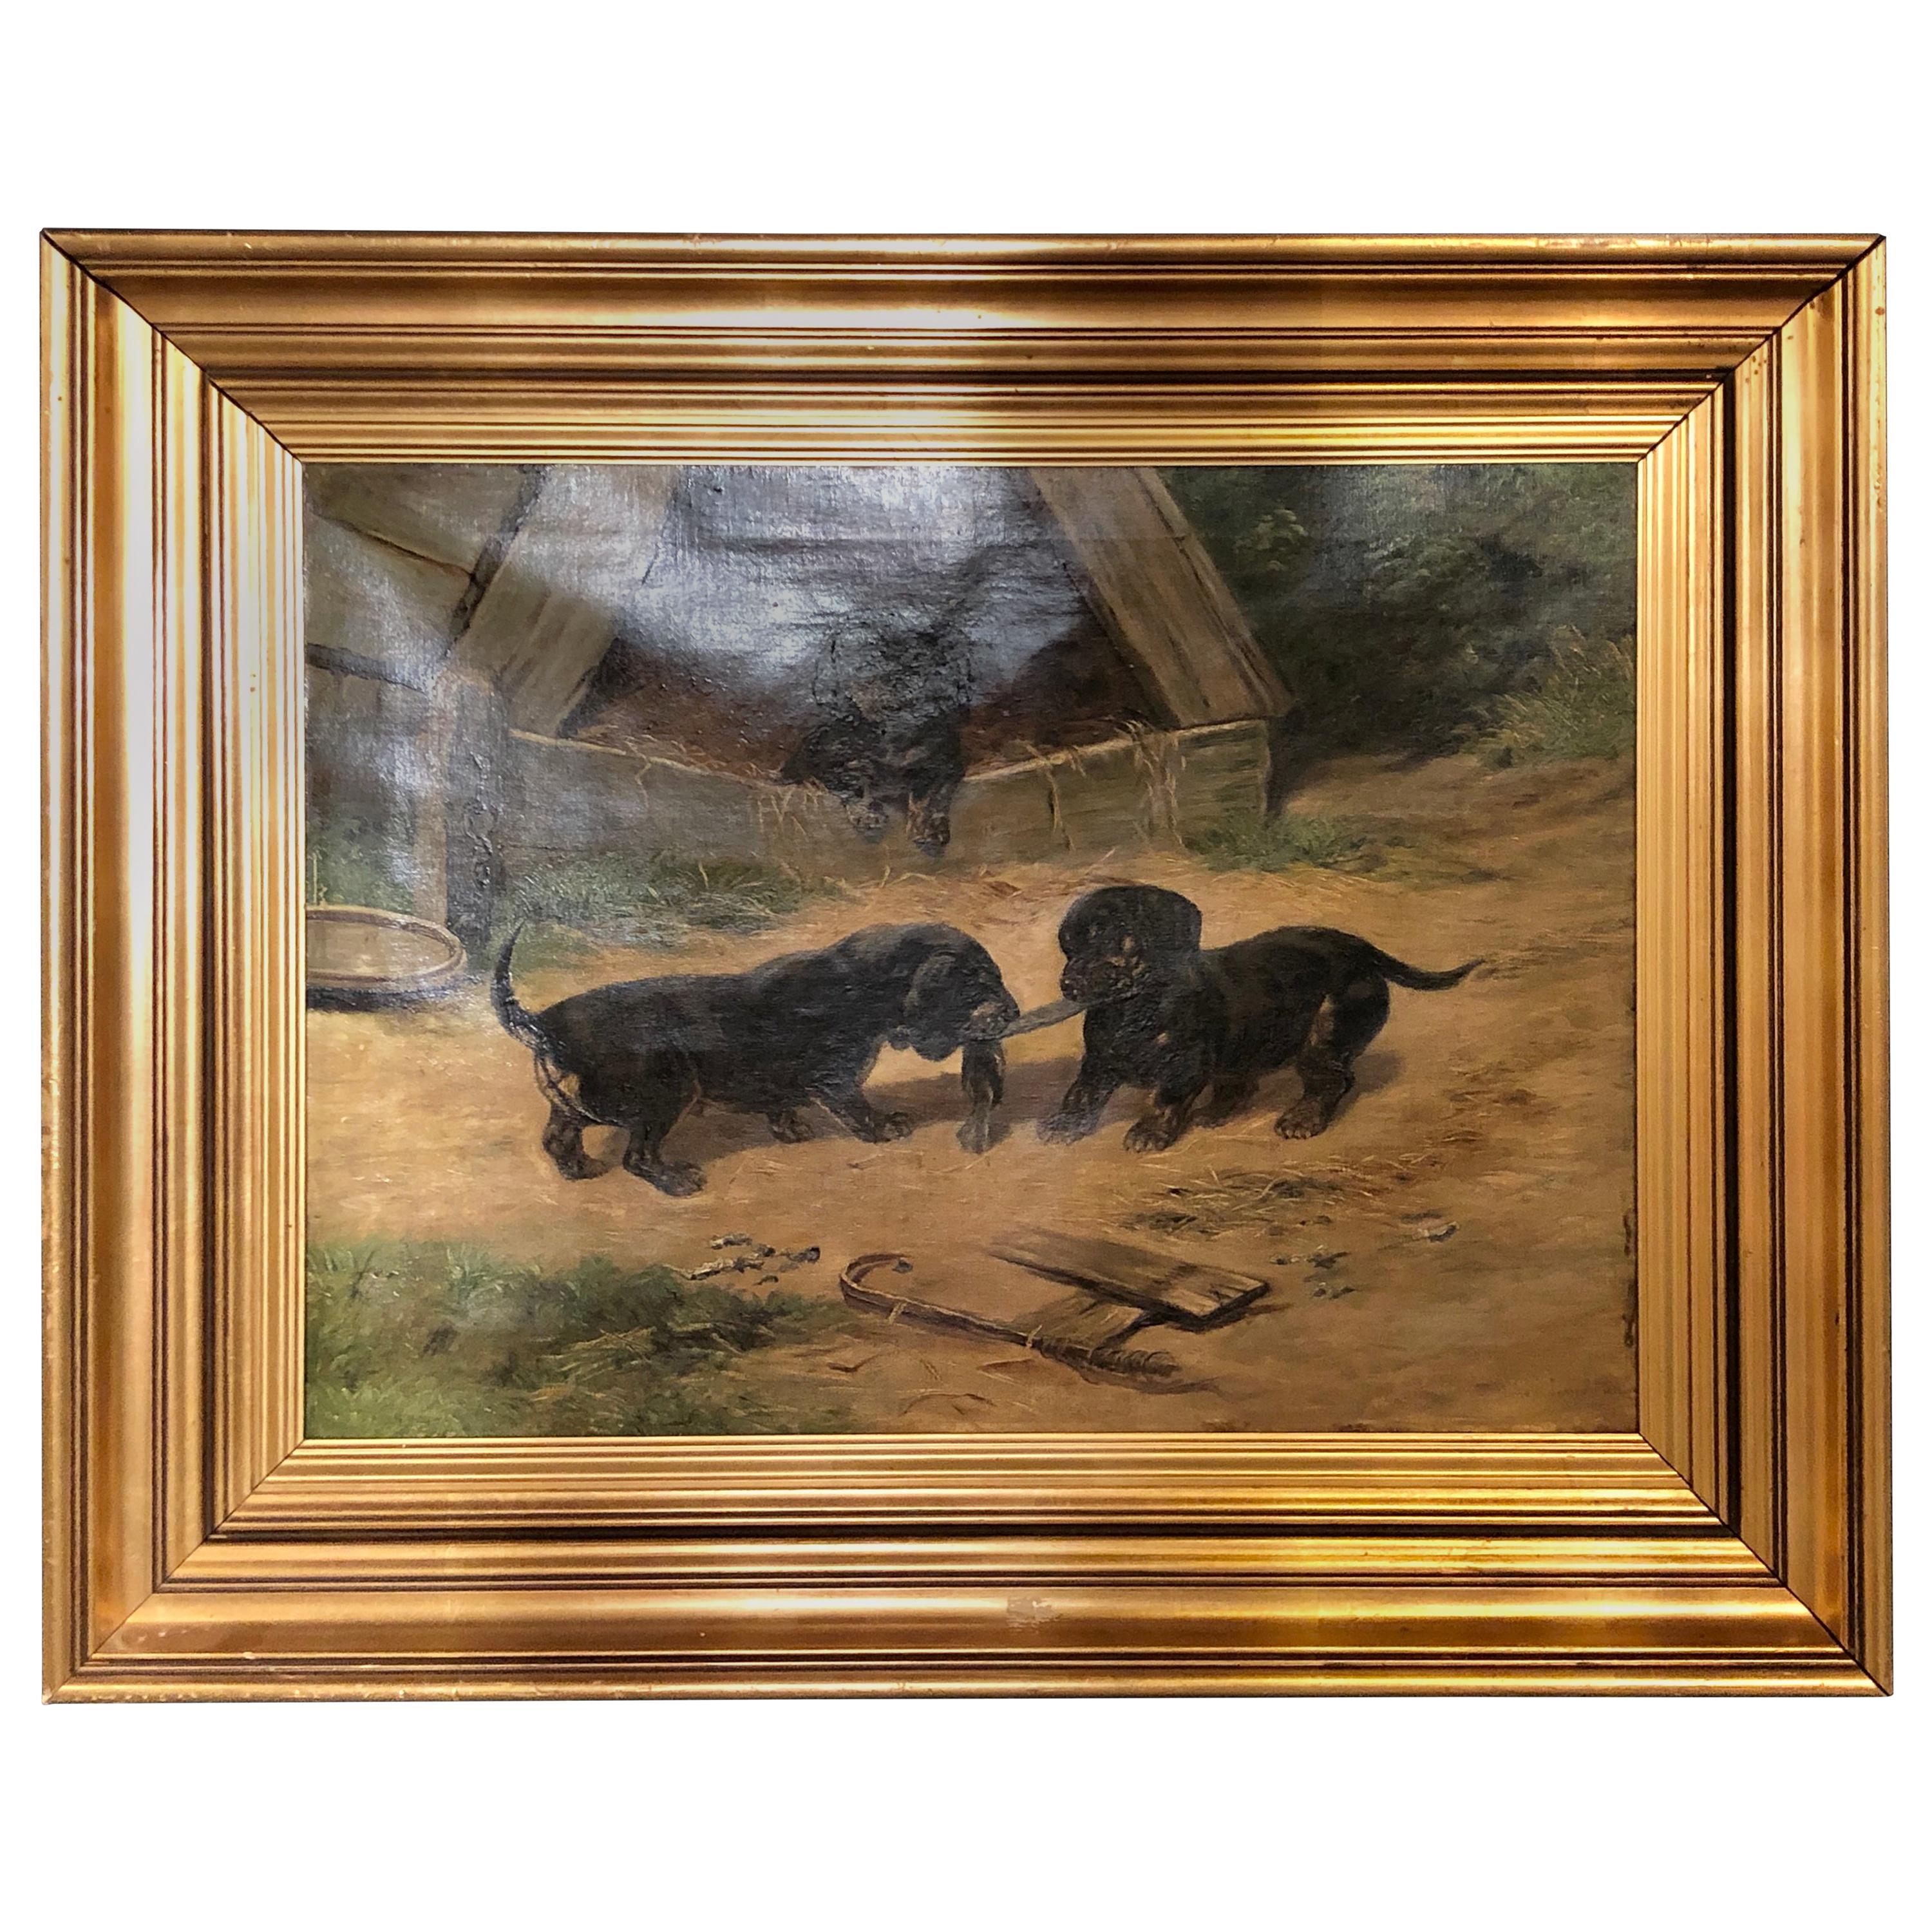 Oil on Canvas "Dachshund Puppies at Play" by Simon Ludvig Ditlev Simonsen